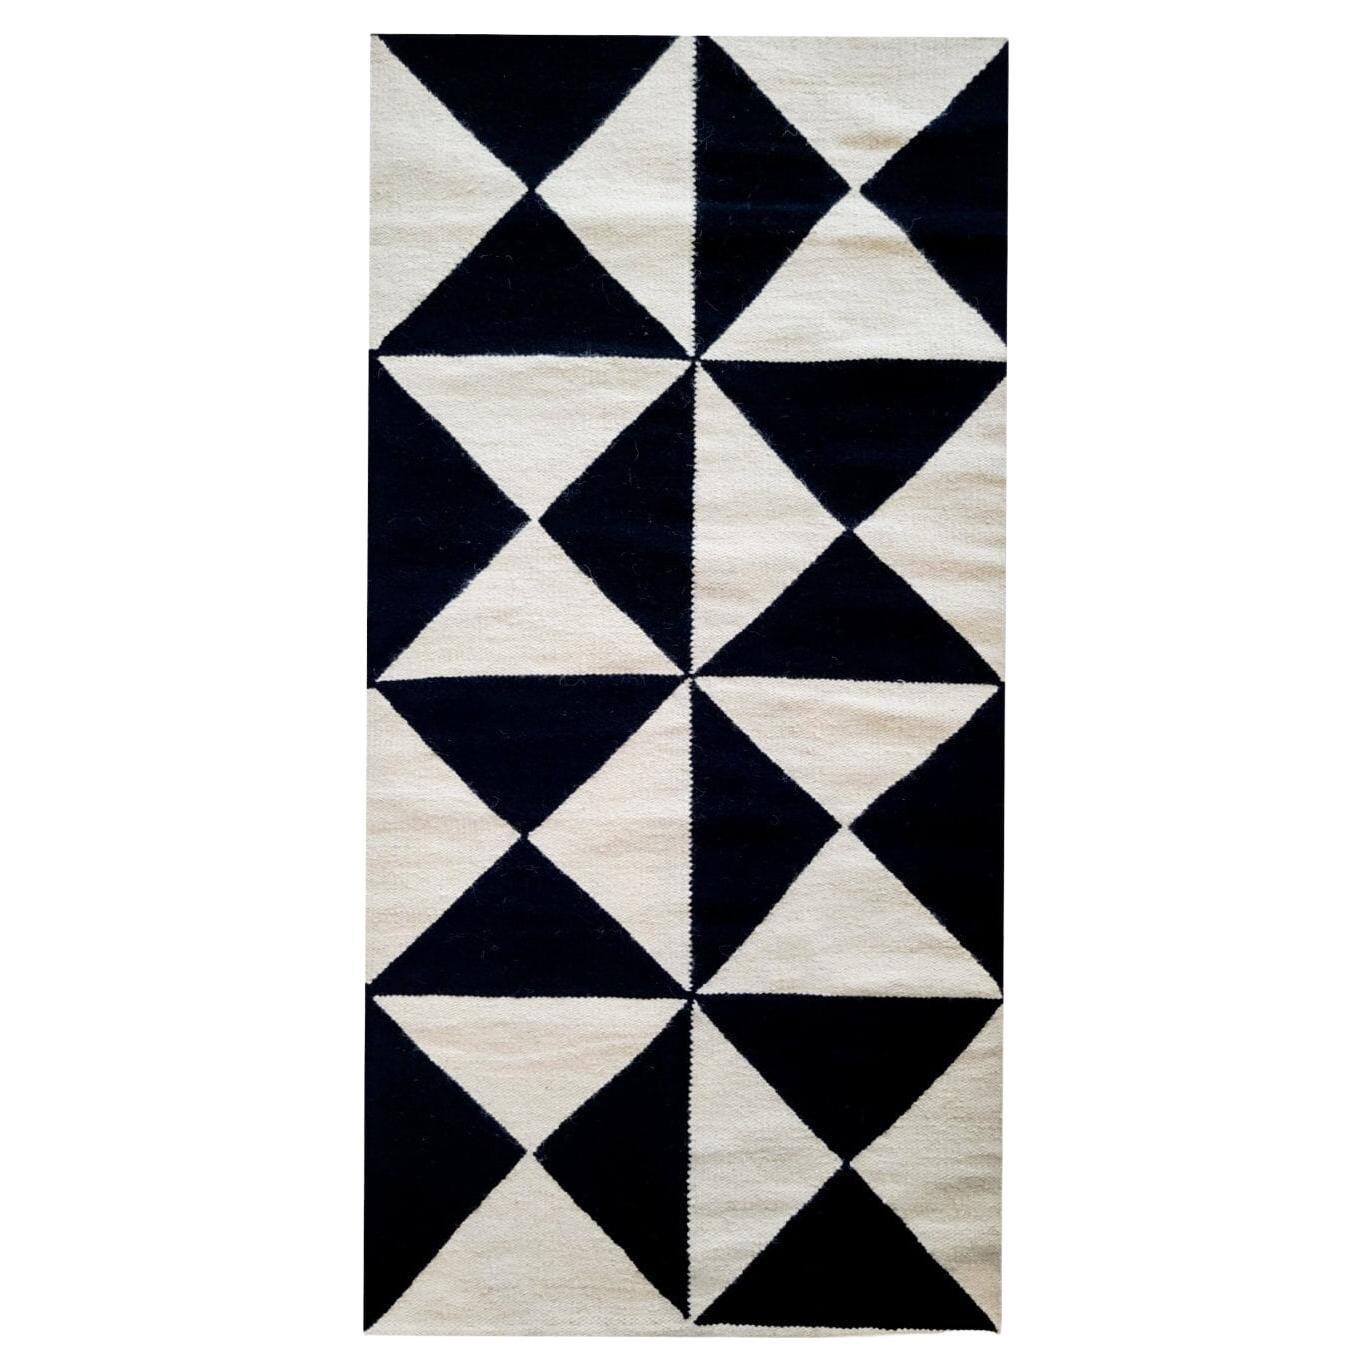 Cream and Black Runner Handwoven Rug 2.5'x6' For Sale